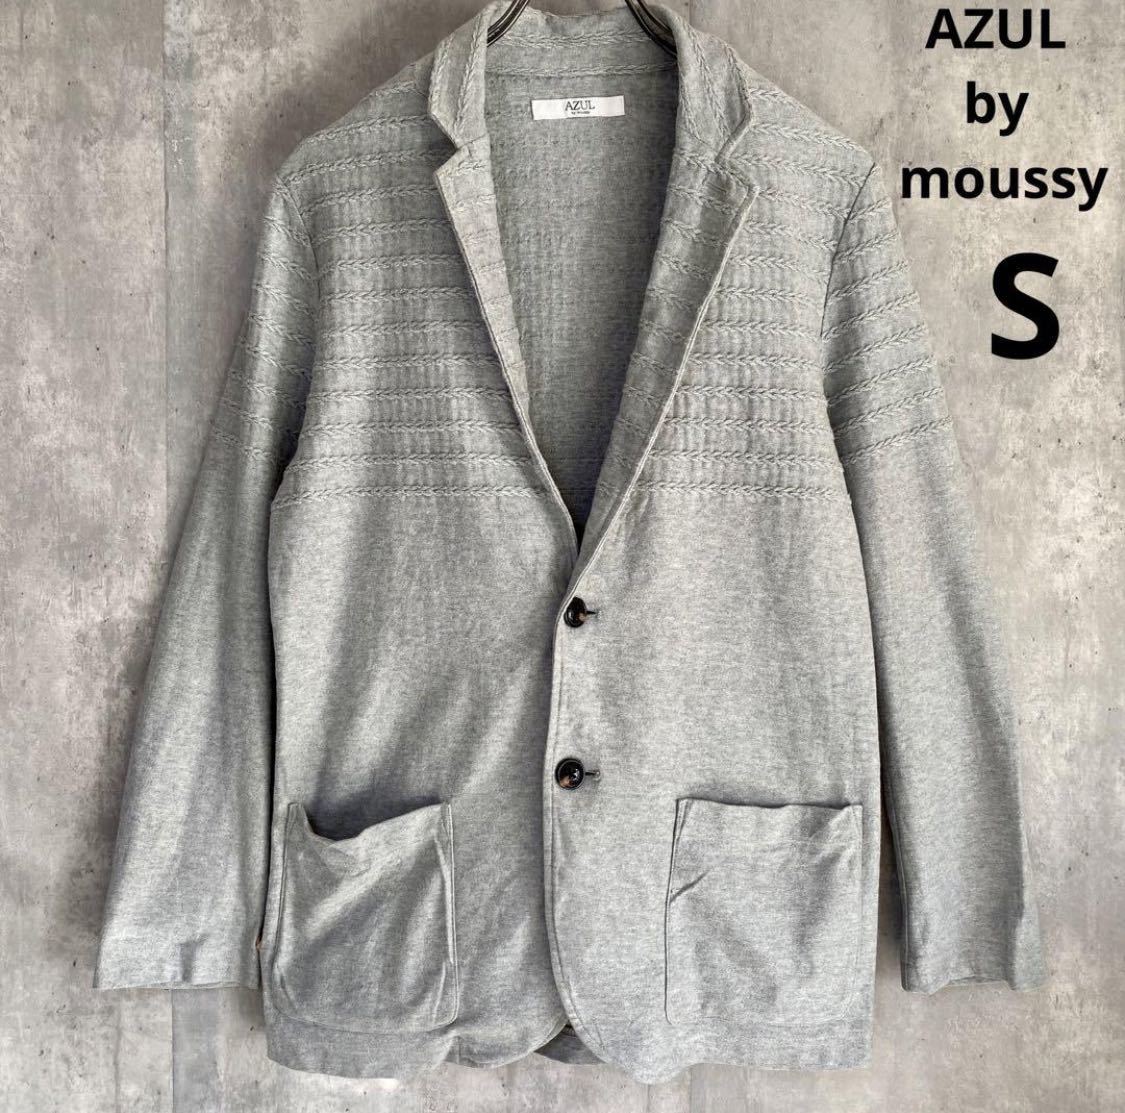  azur AZUL by moussy cardigan cotton 100% S